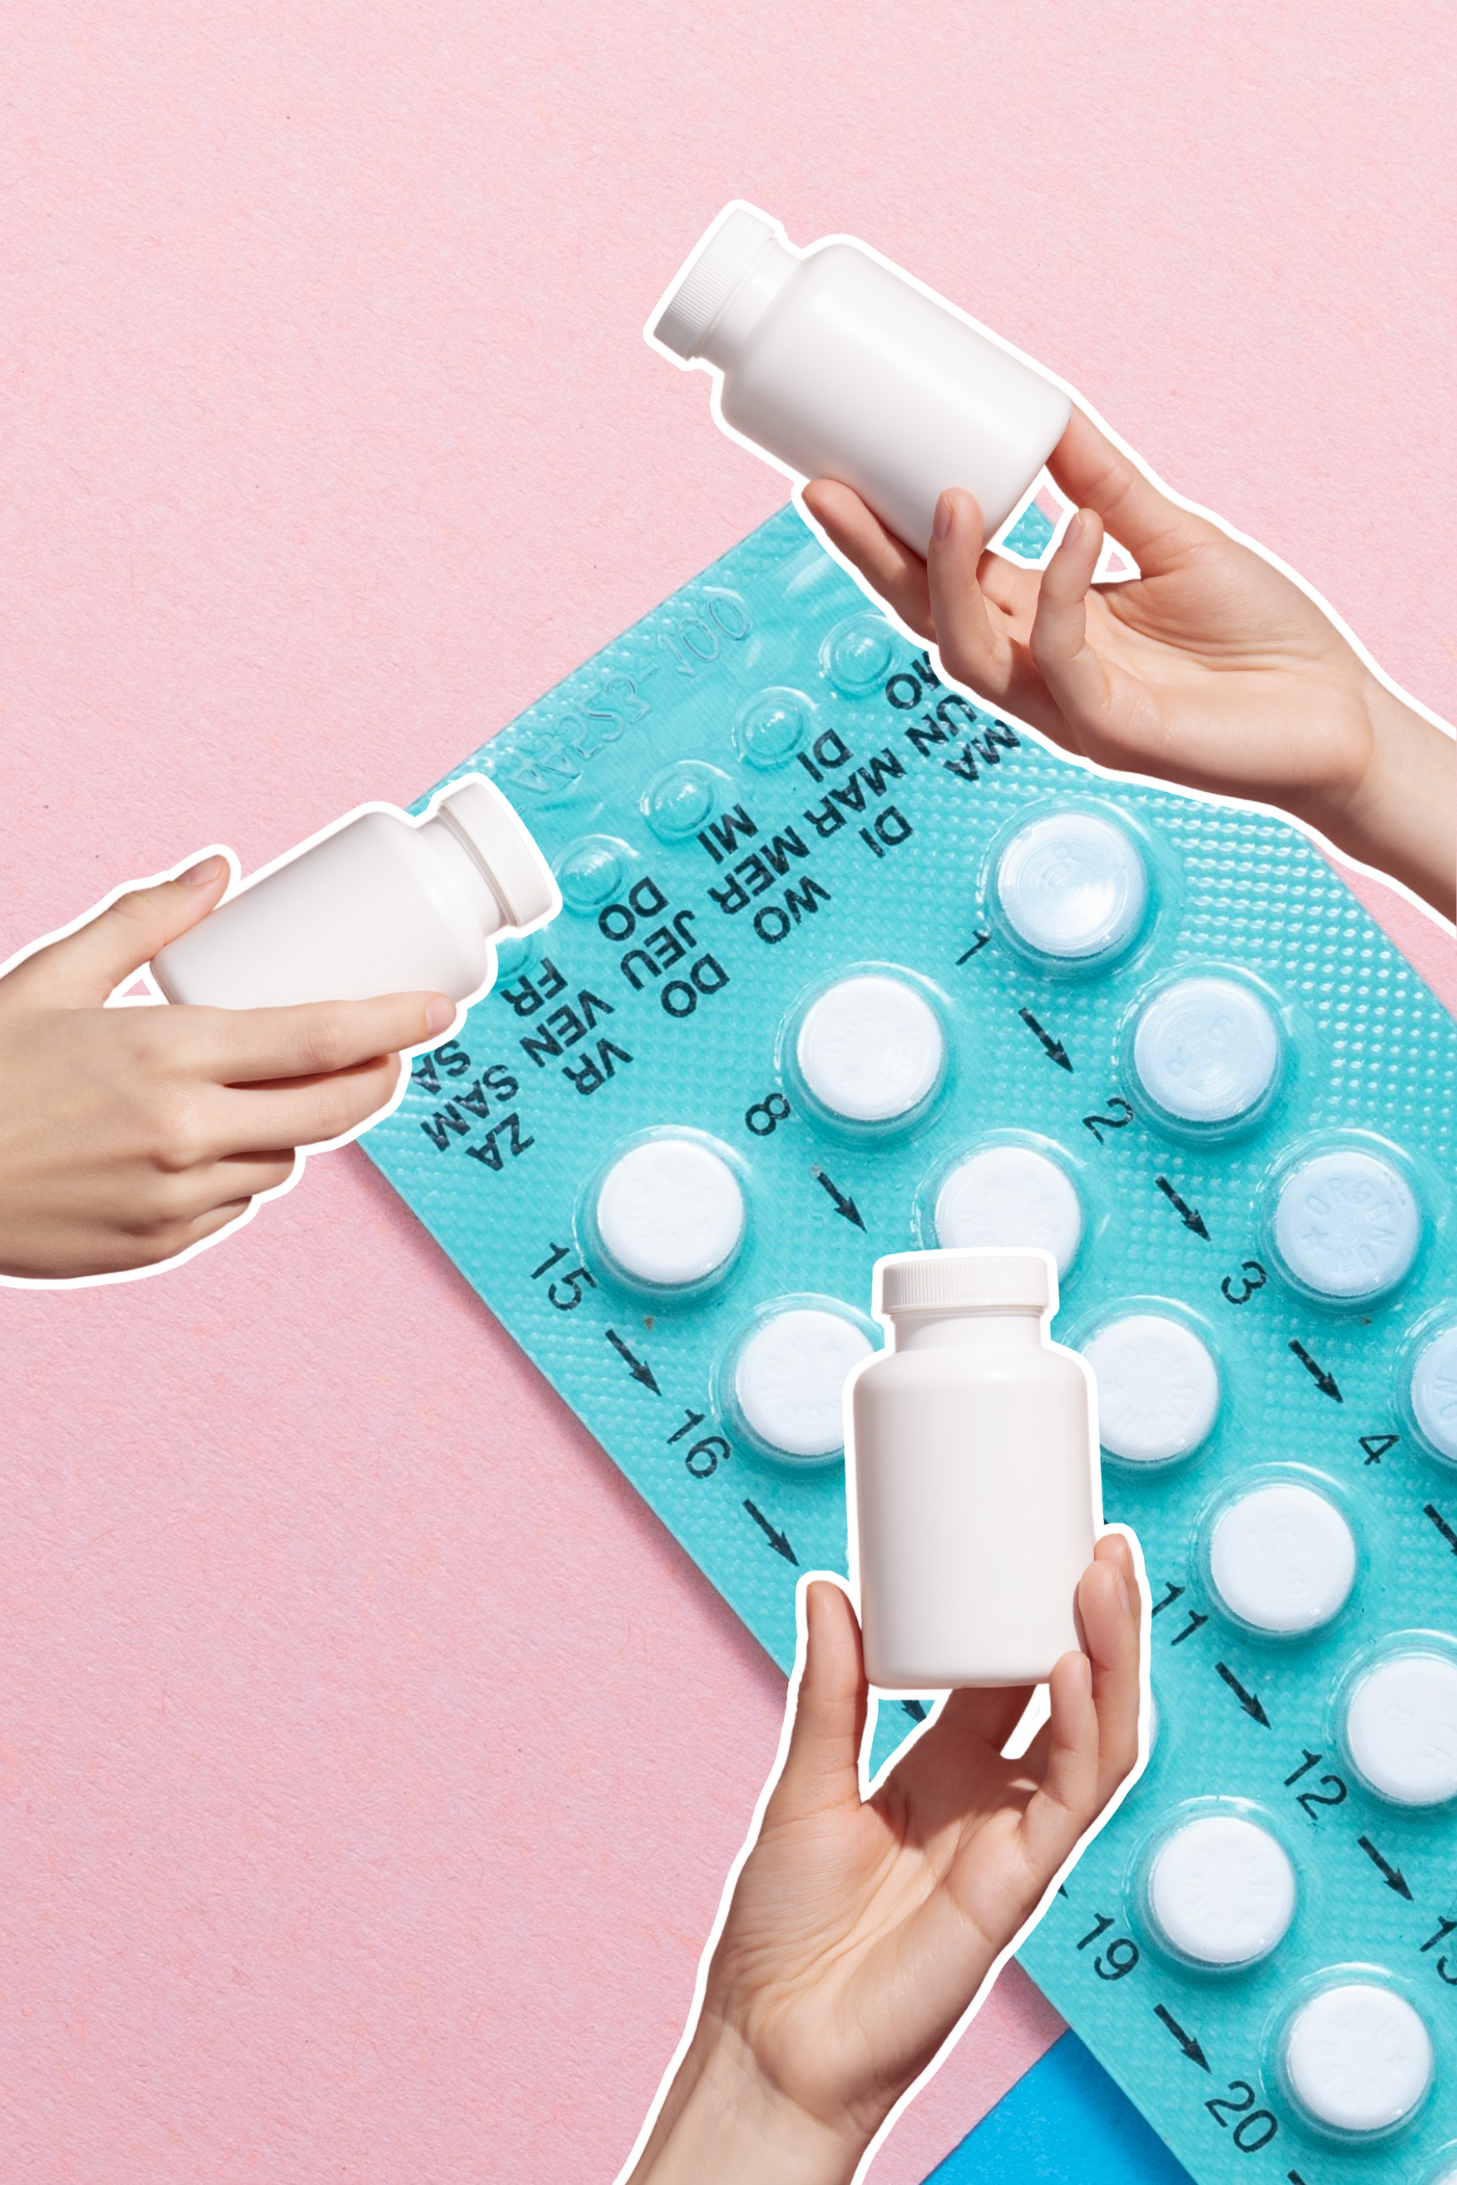 The Washington Post recently published an article called "Women are getting off birth control amid misinformation explosion," which describe